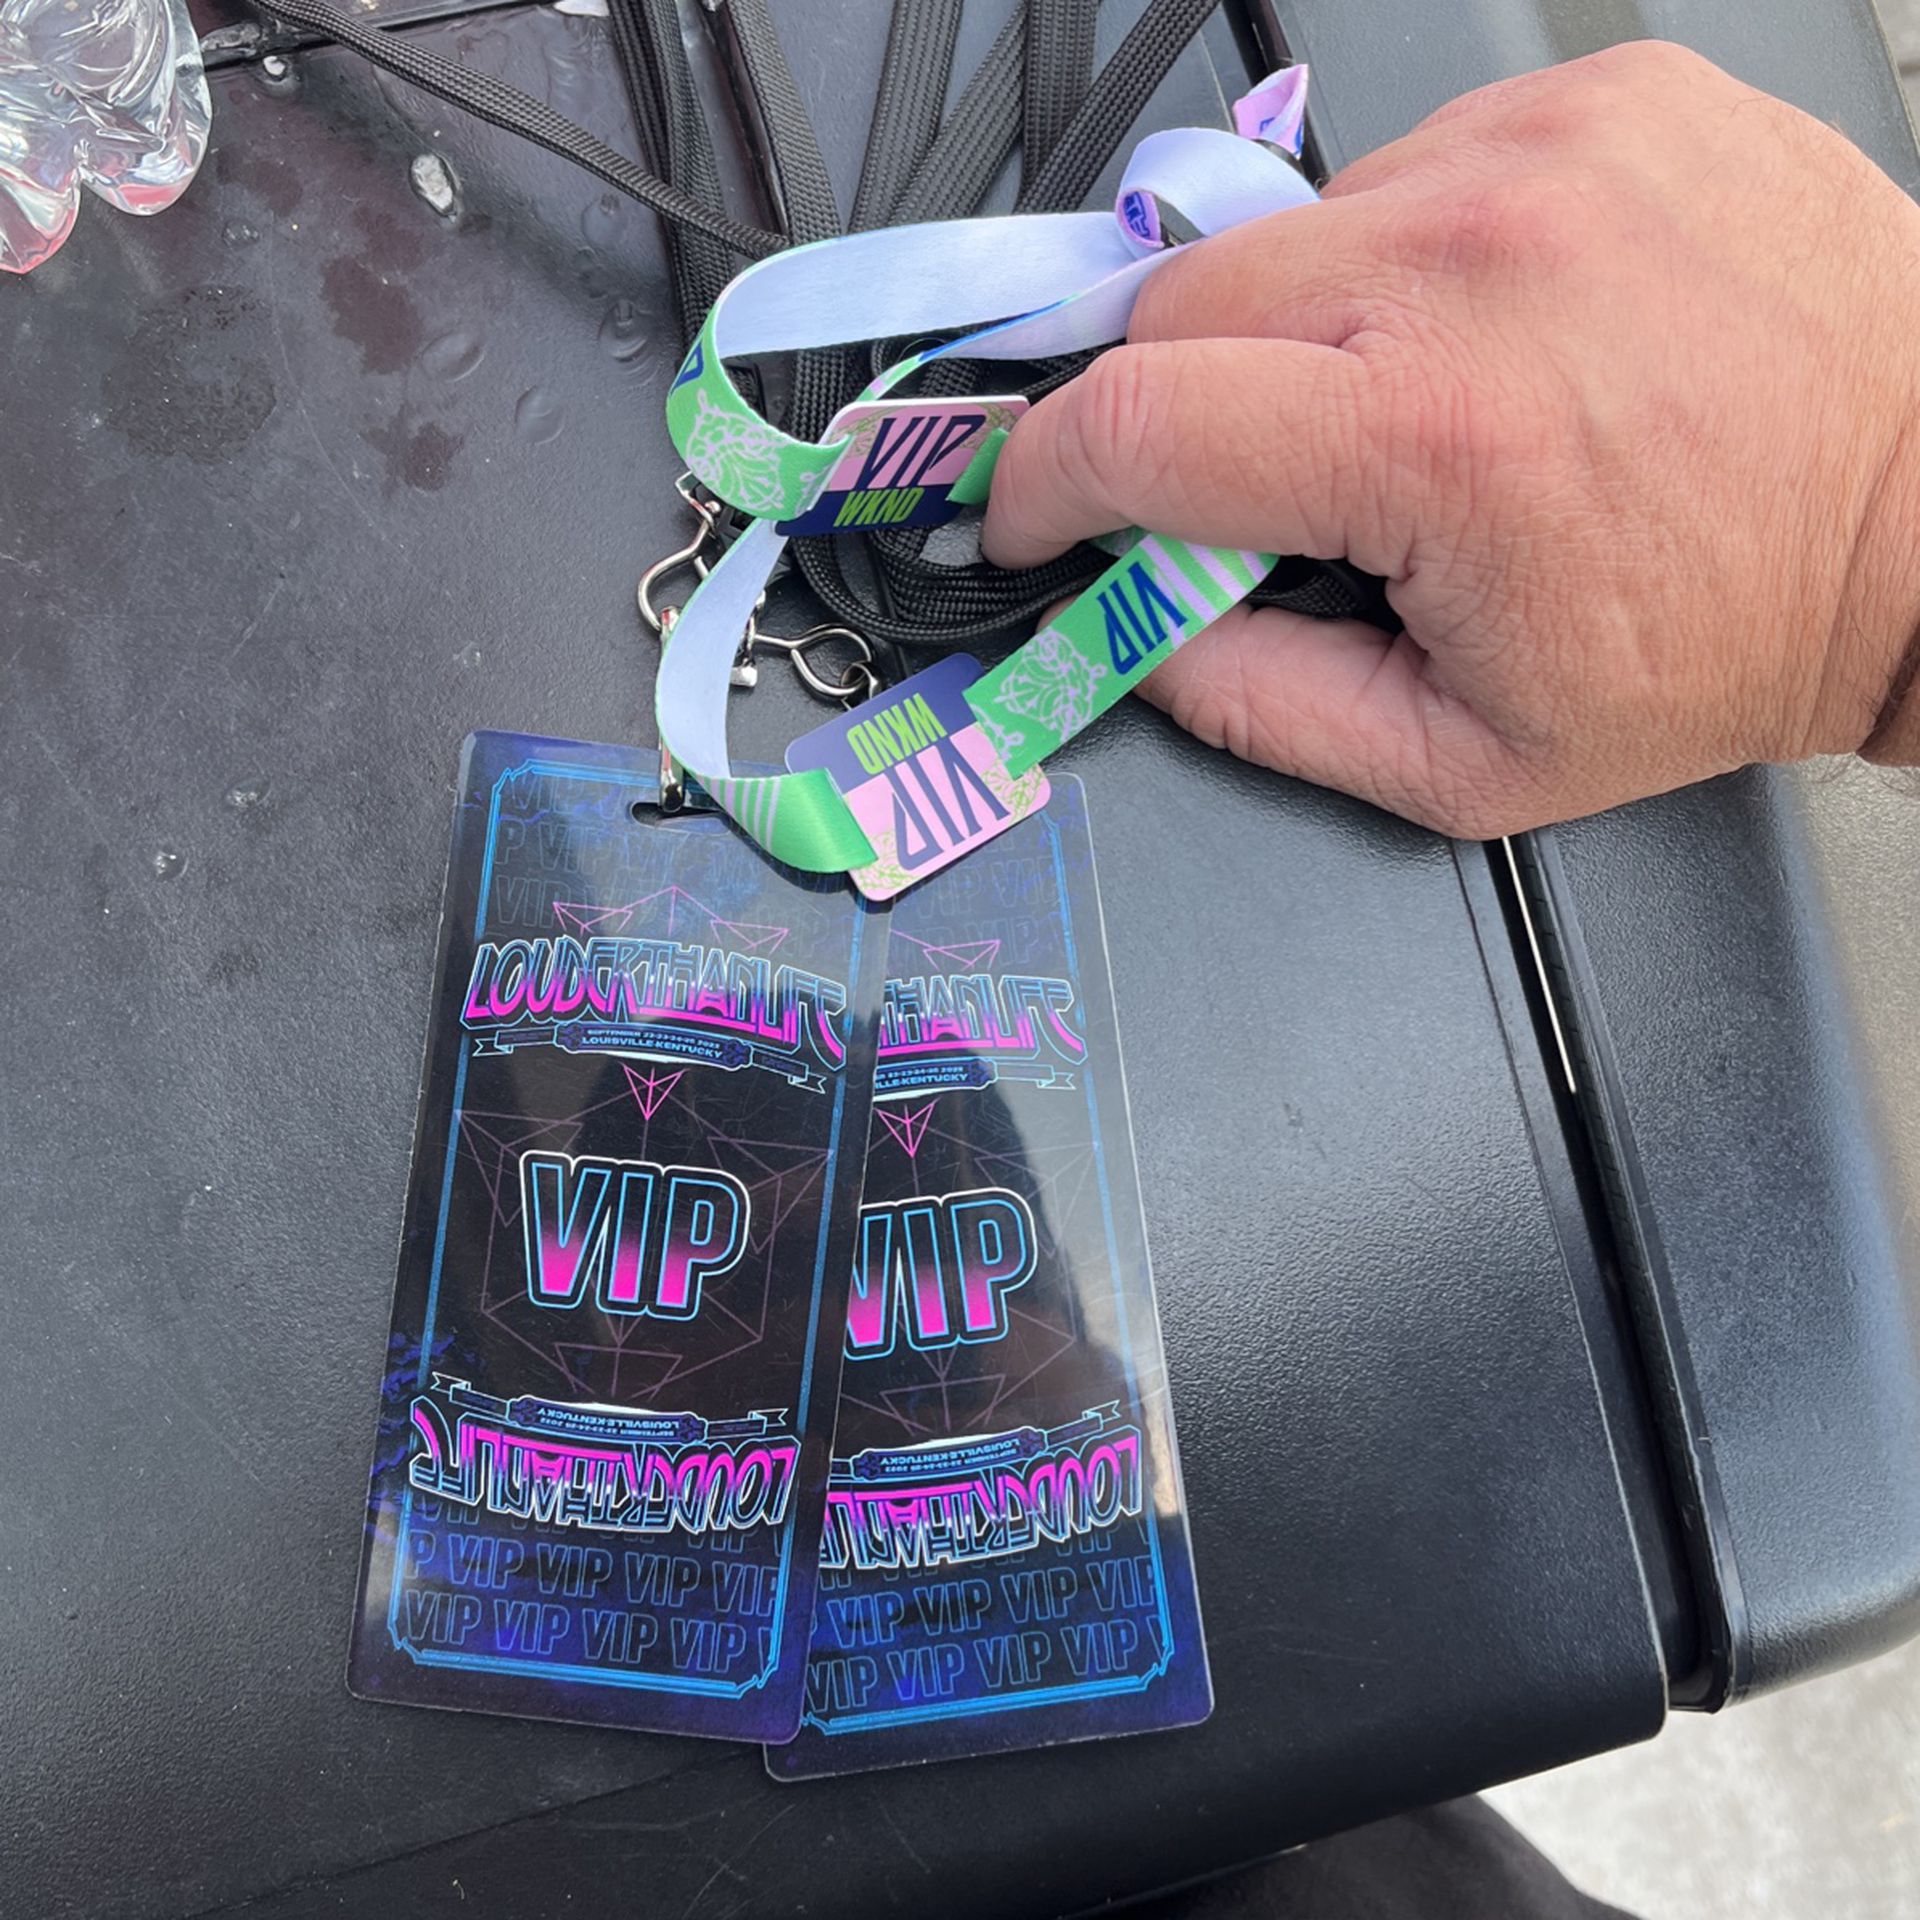 Louder than life VIP weekend passes $400 each